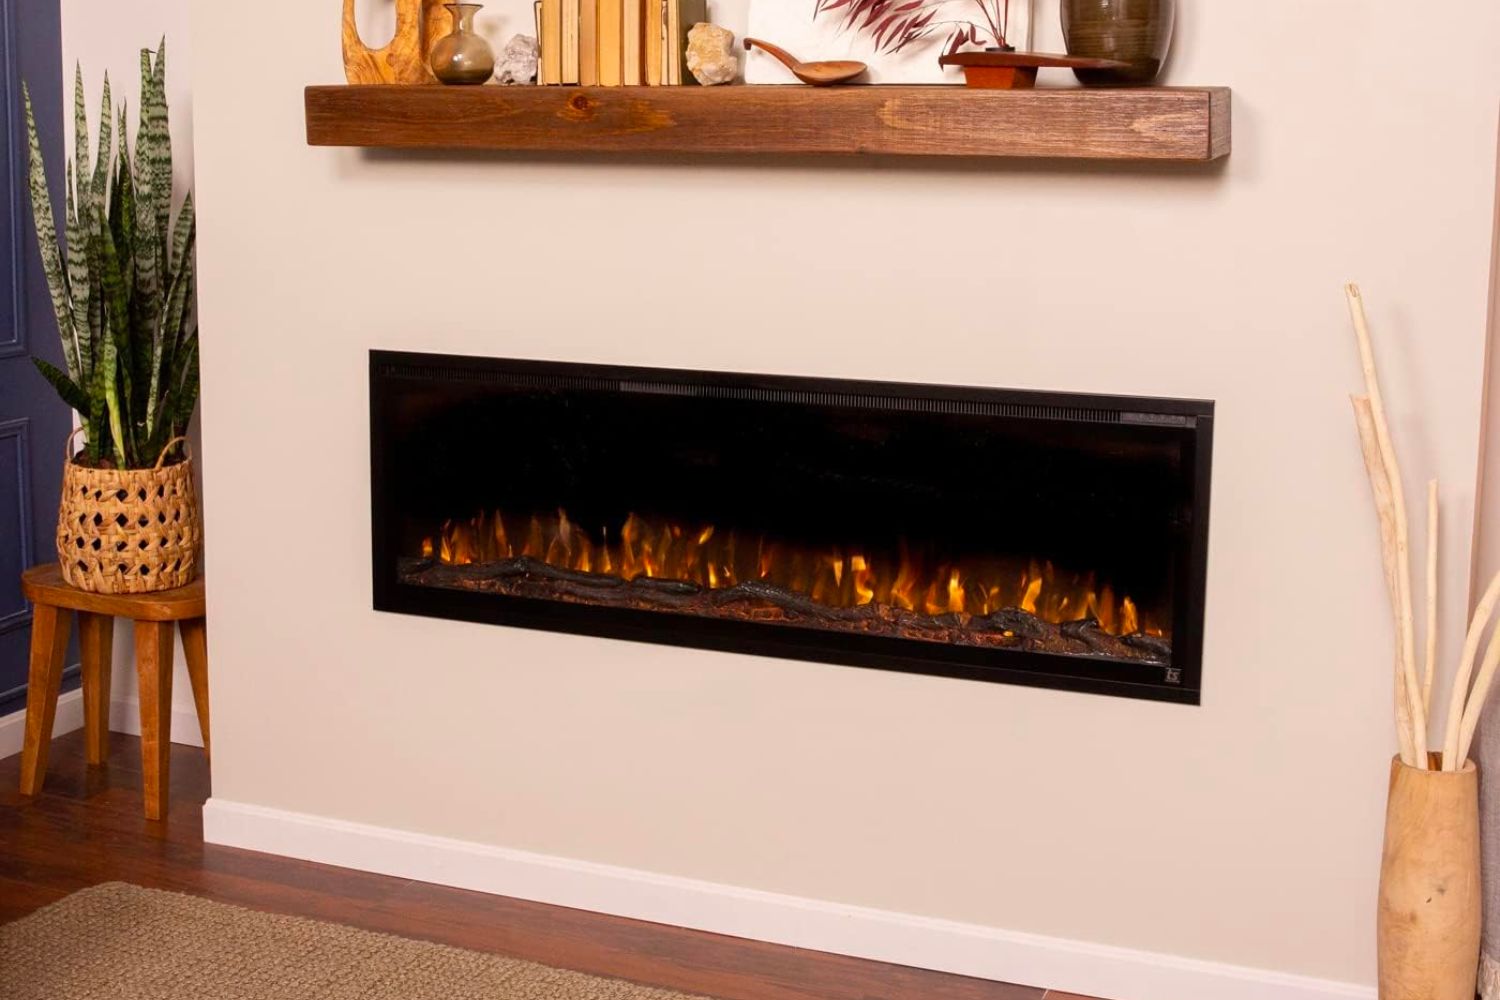 The best electric fireplace insert option installed beneath a floating wooden mantel